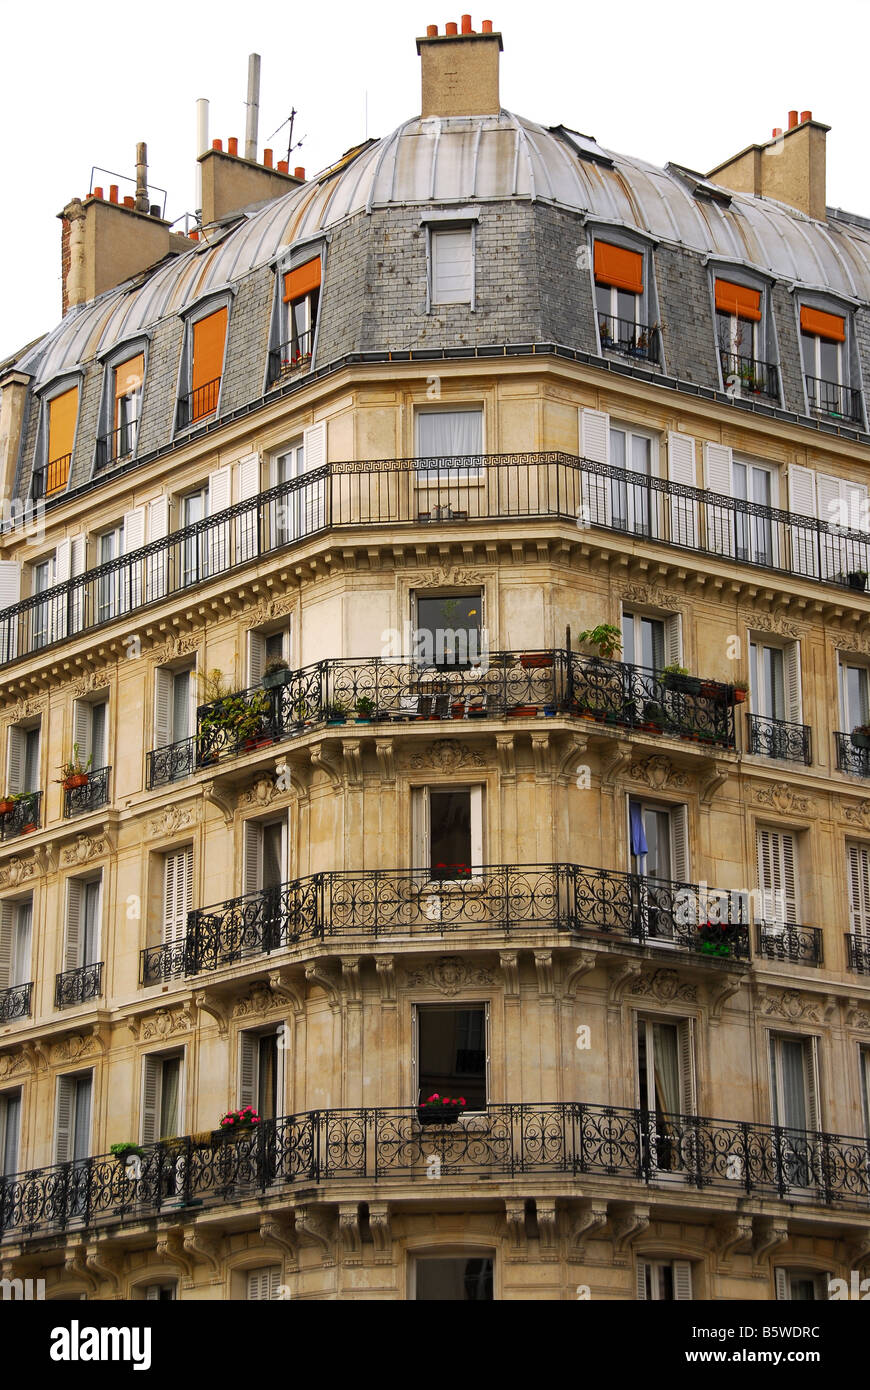 Old apartment buildings with wrought iron balconies in Paris France Stock Photo